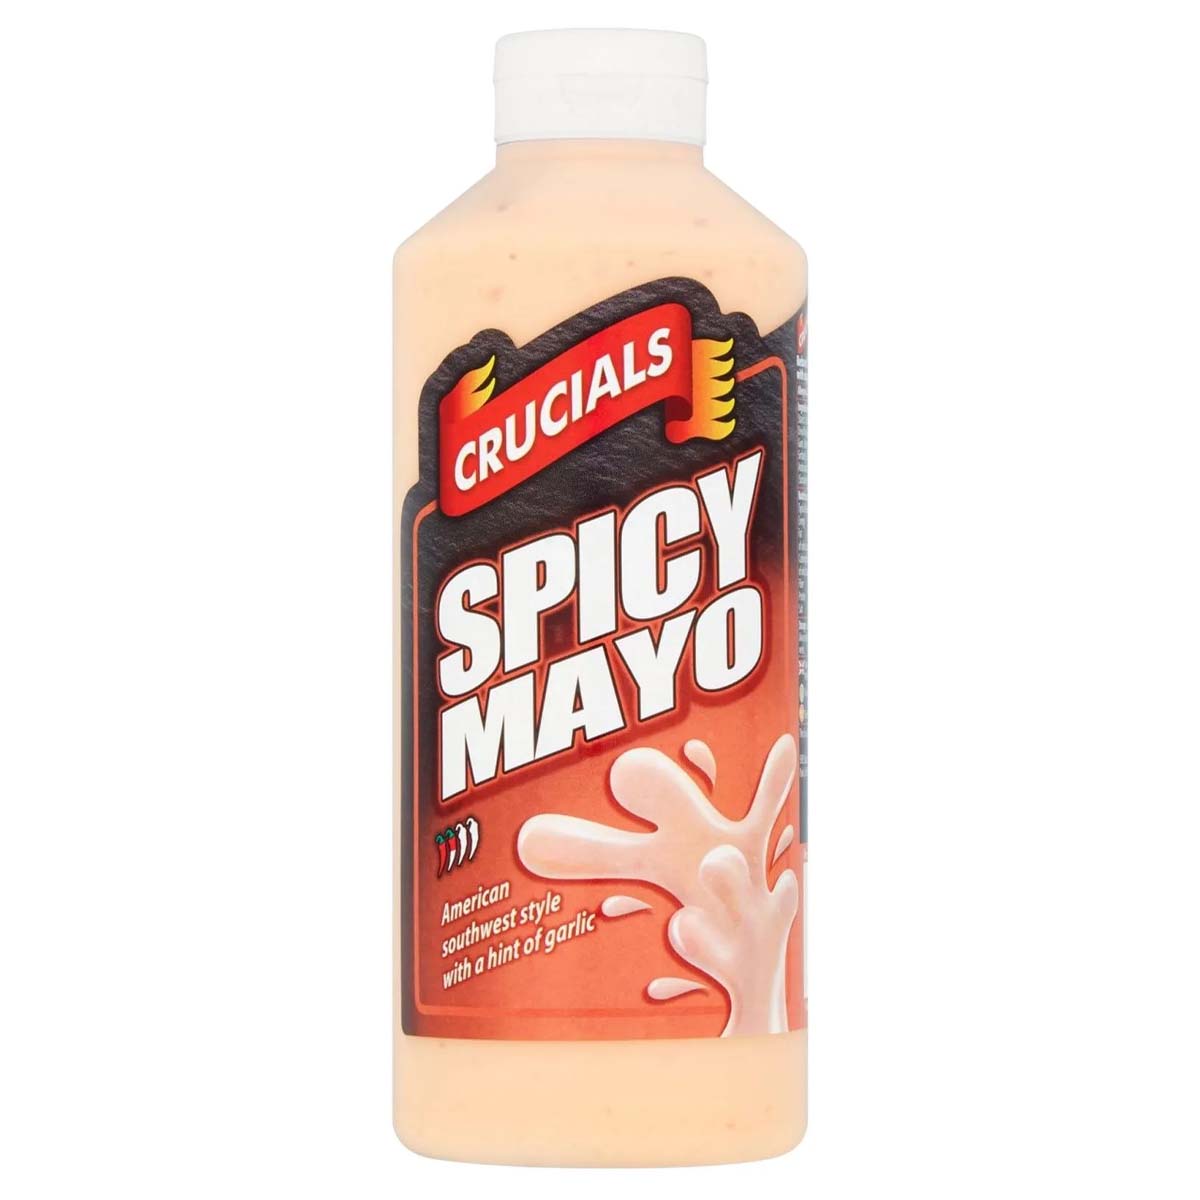 Crucials - Spicy Mayo - 500ml - Continental Food Store